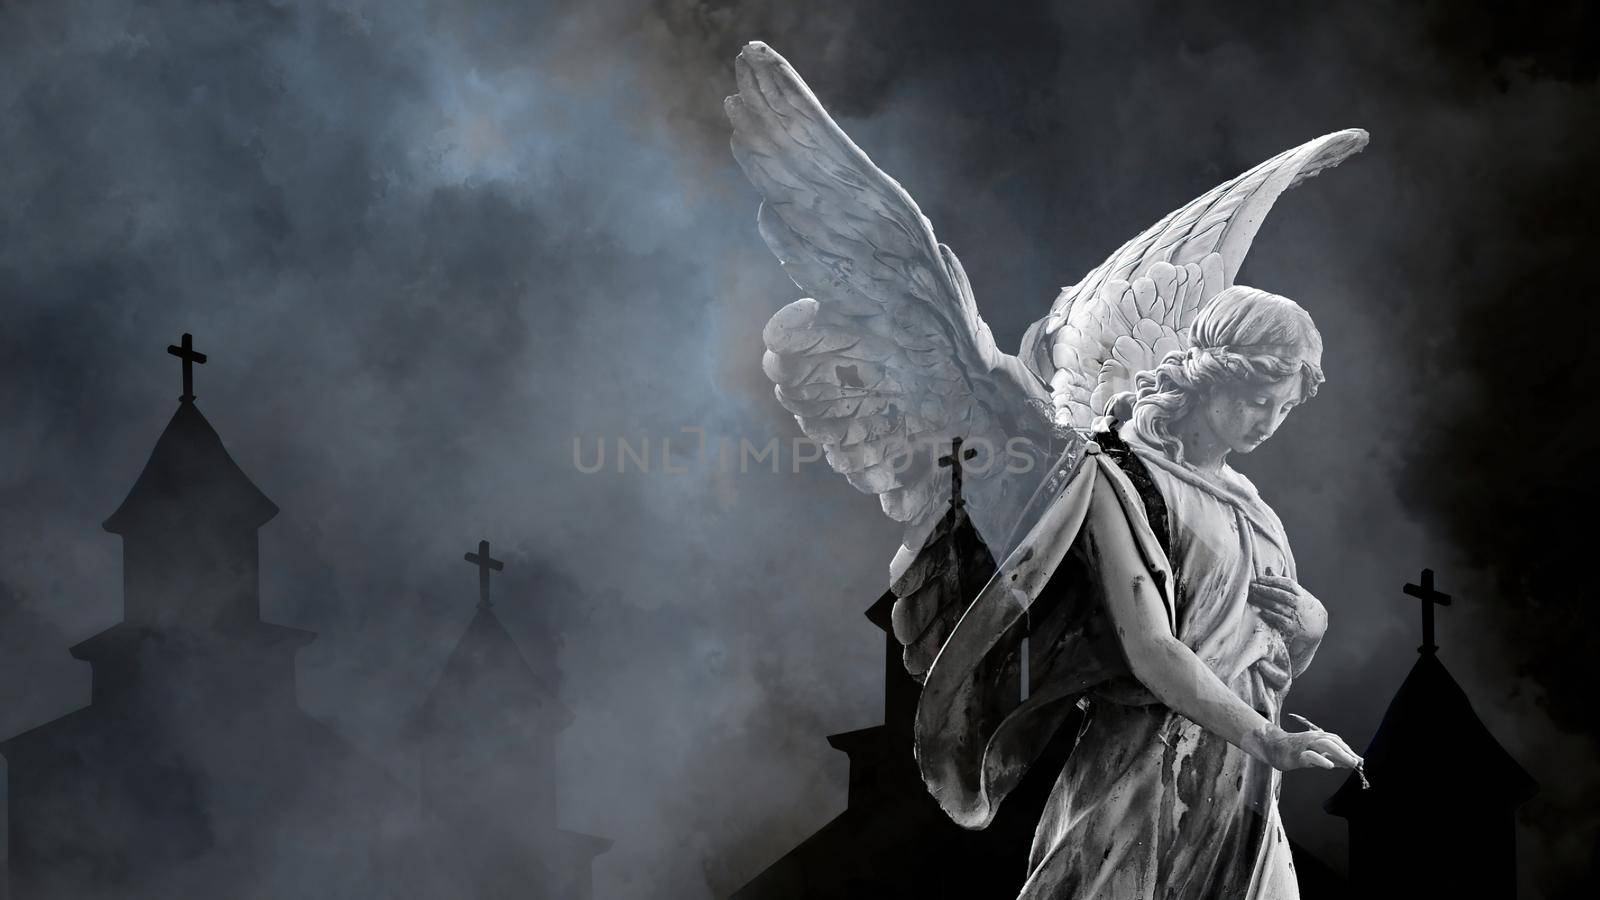 3d illustration - woman angel  with wings and old Churches silhouettes  in background